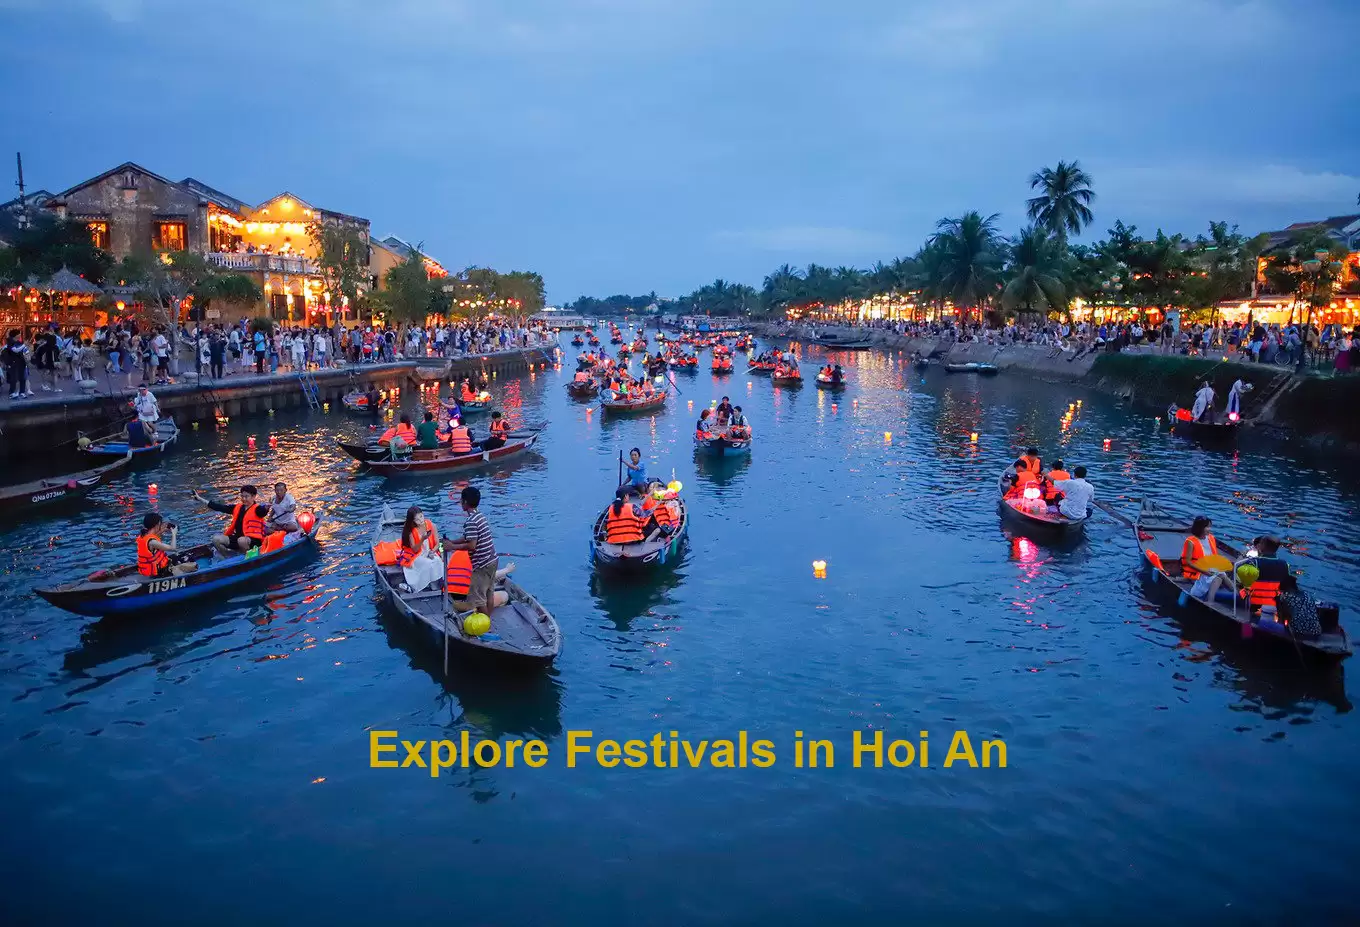 Experiential journey: Explore Hoi An's festivals and cultural heritage